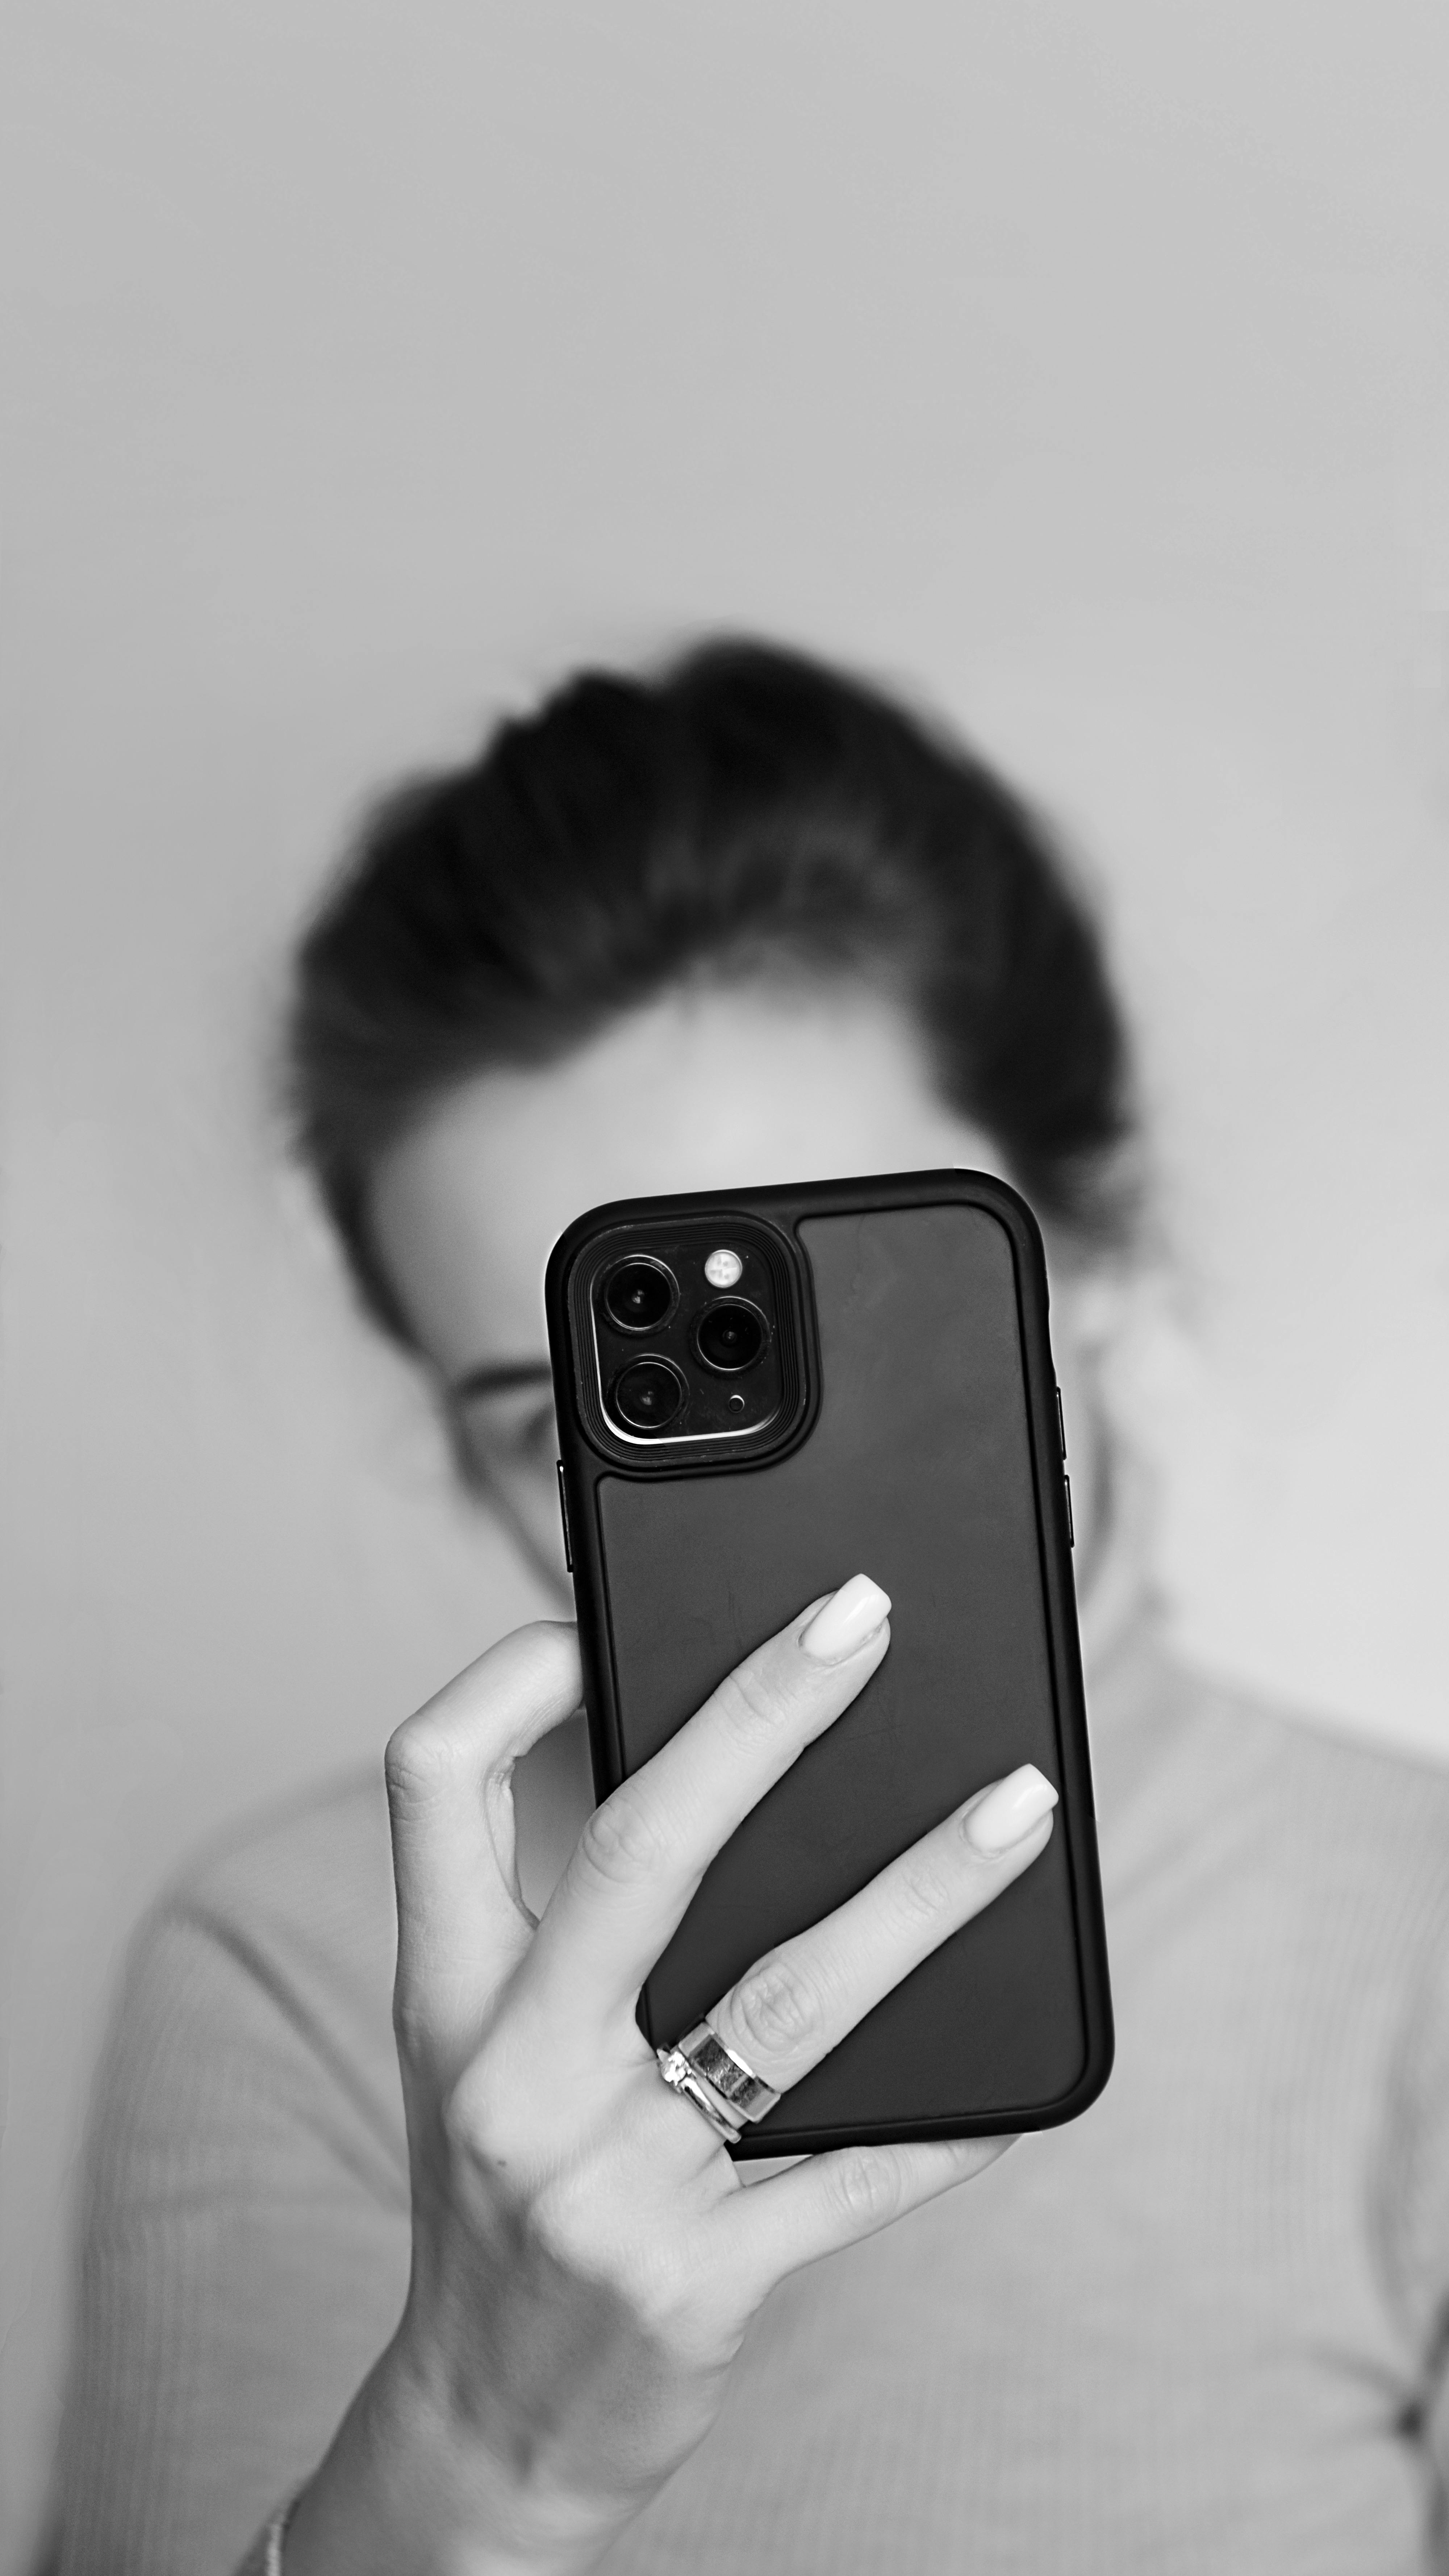 A woman hiding her face with her phone | Source: Pexels